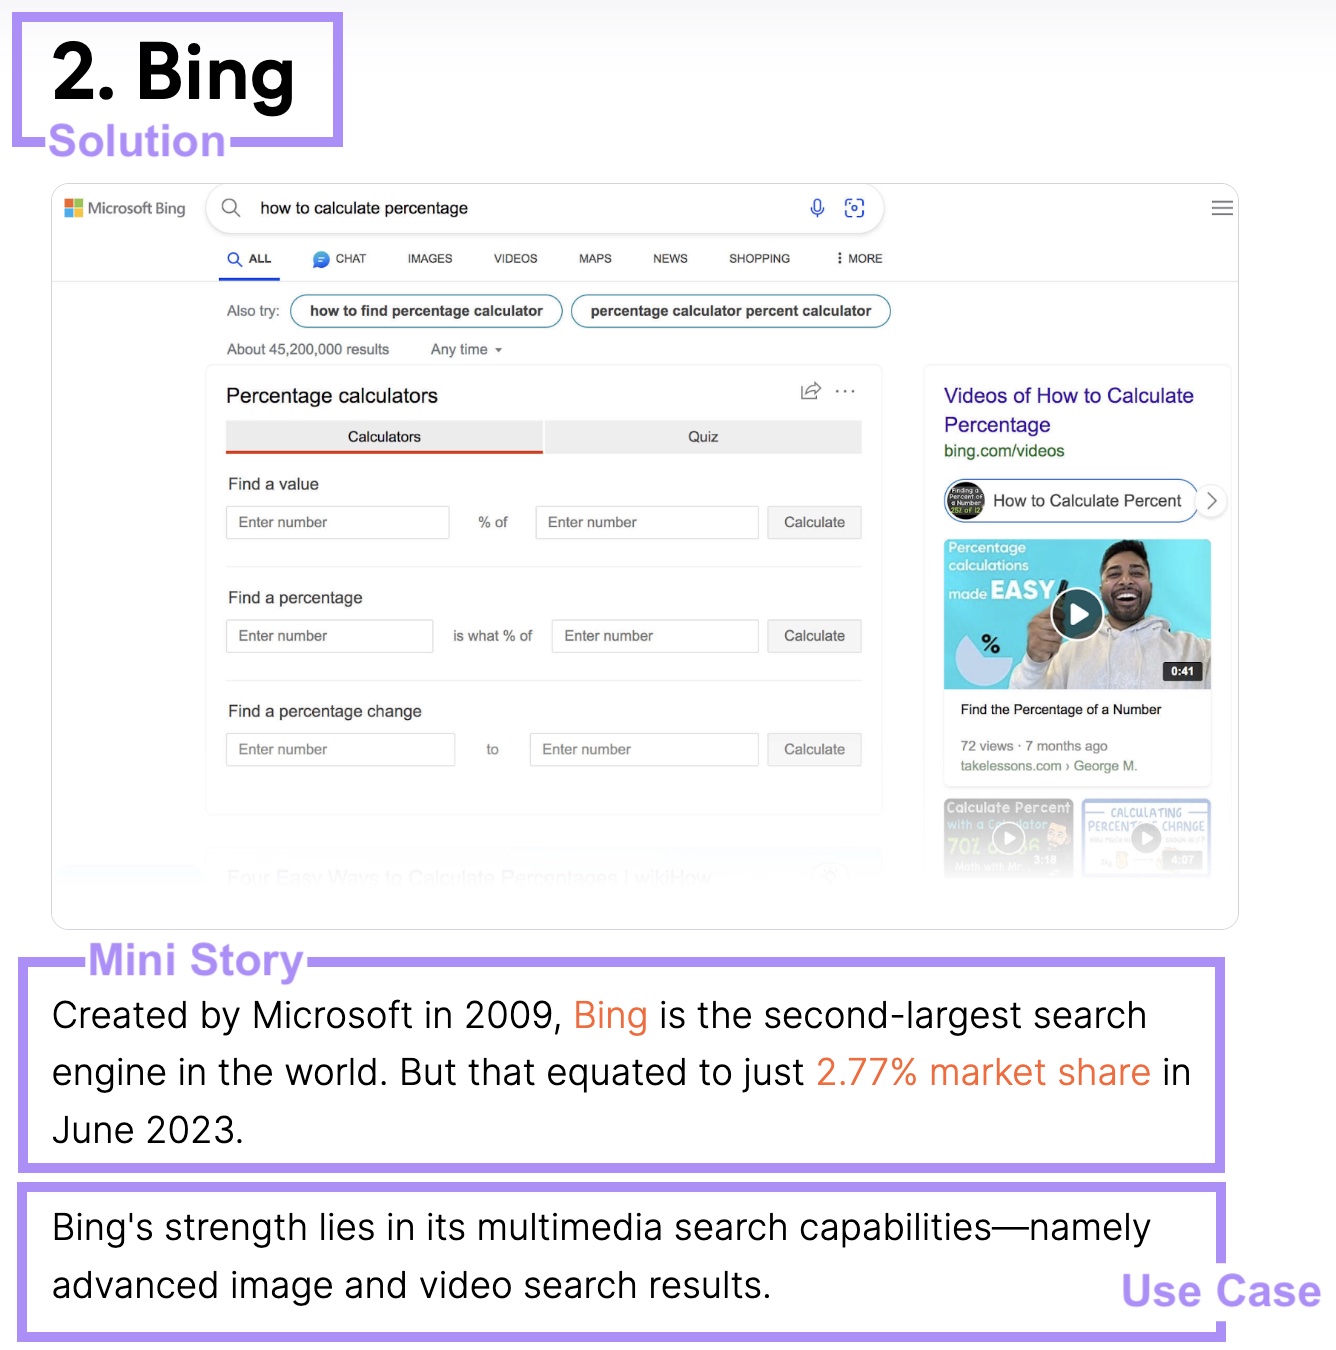 Bing's mini story from Semrush's listicle on best search engines